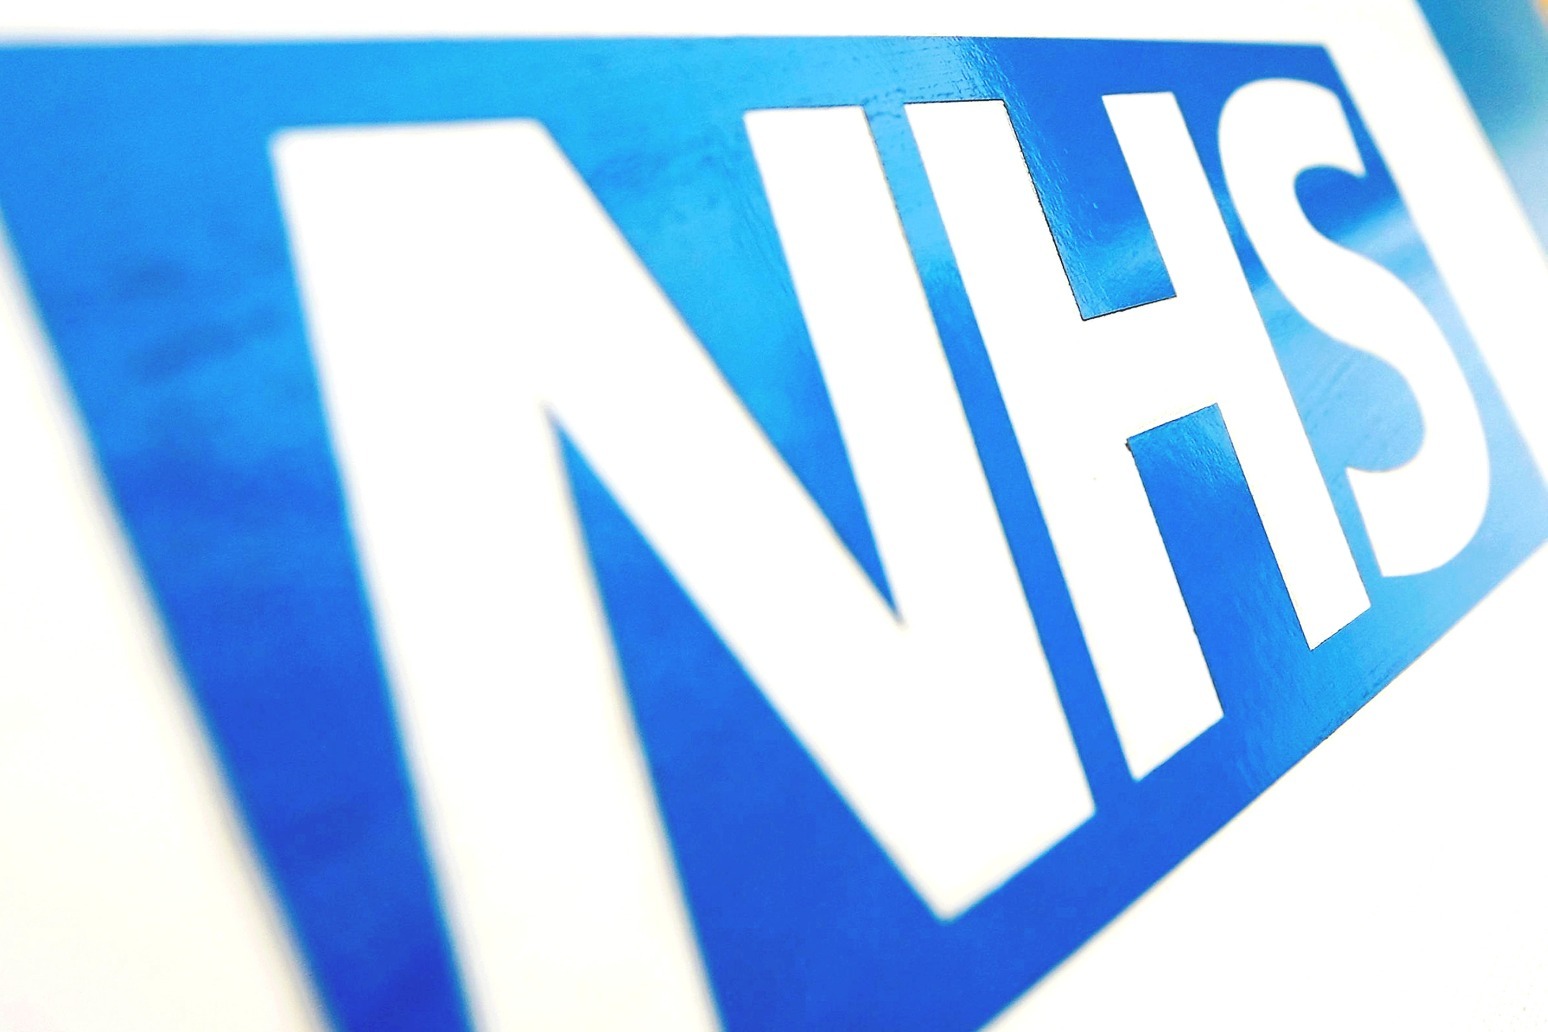 Protests planned in support of NHS funding and against privatisation 